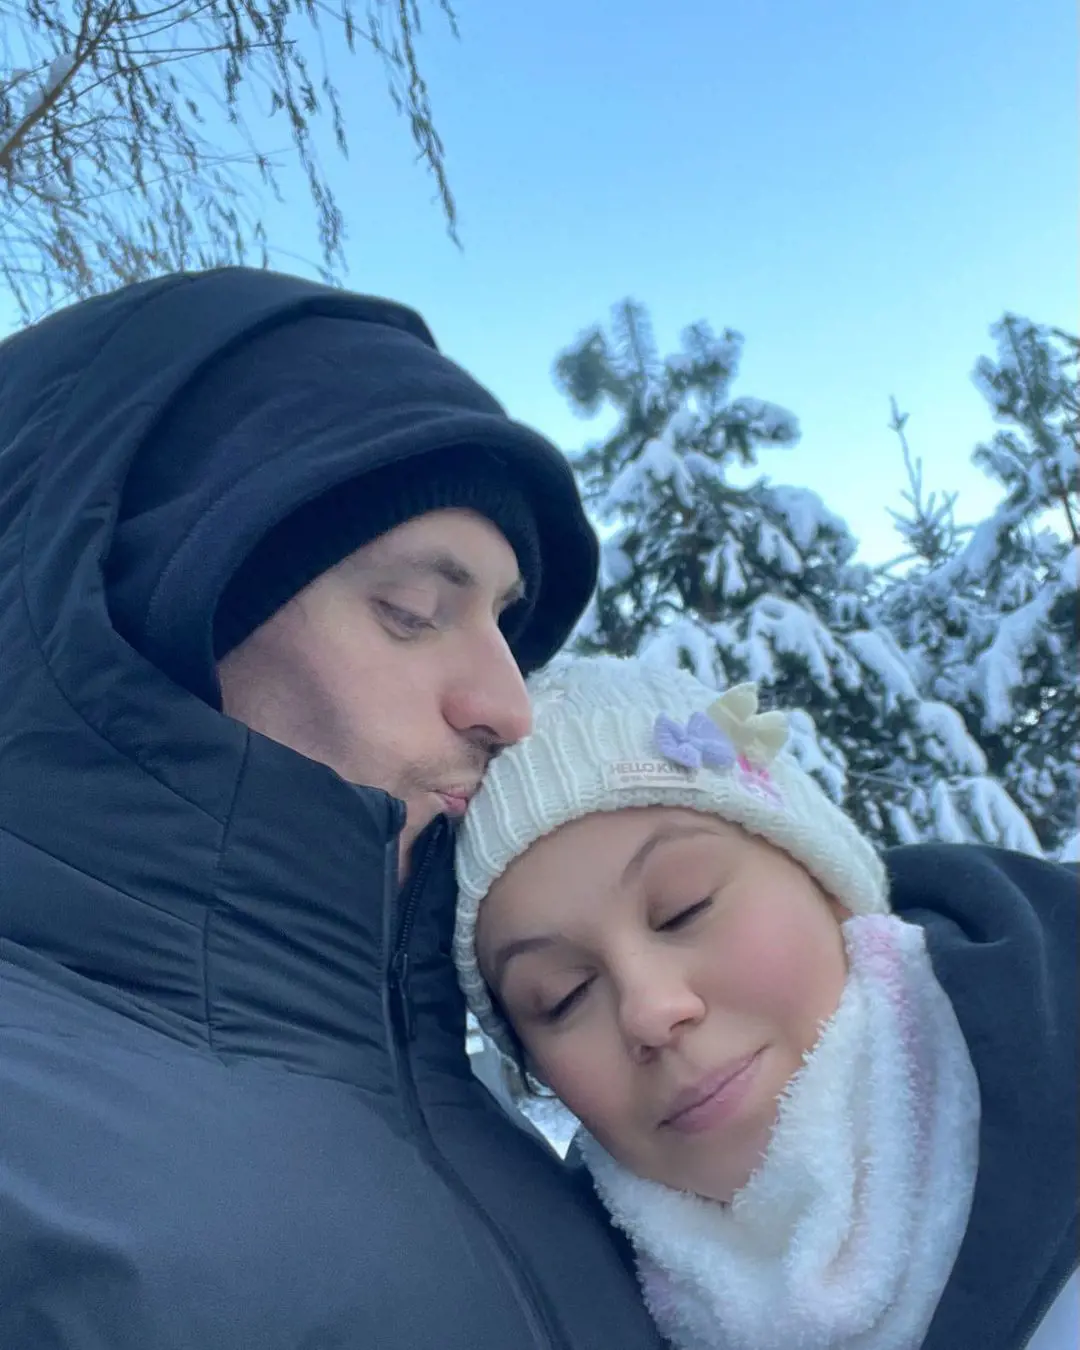 Sergei kissing on his girlfriend Elena's forehead in the cold afternoon of Christmas 2021 in Moscow.